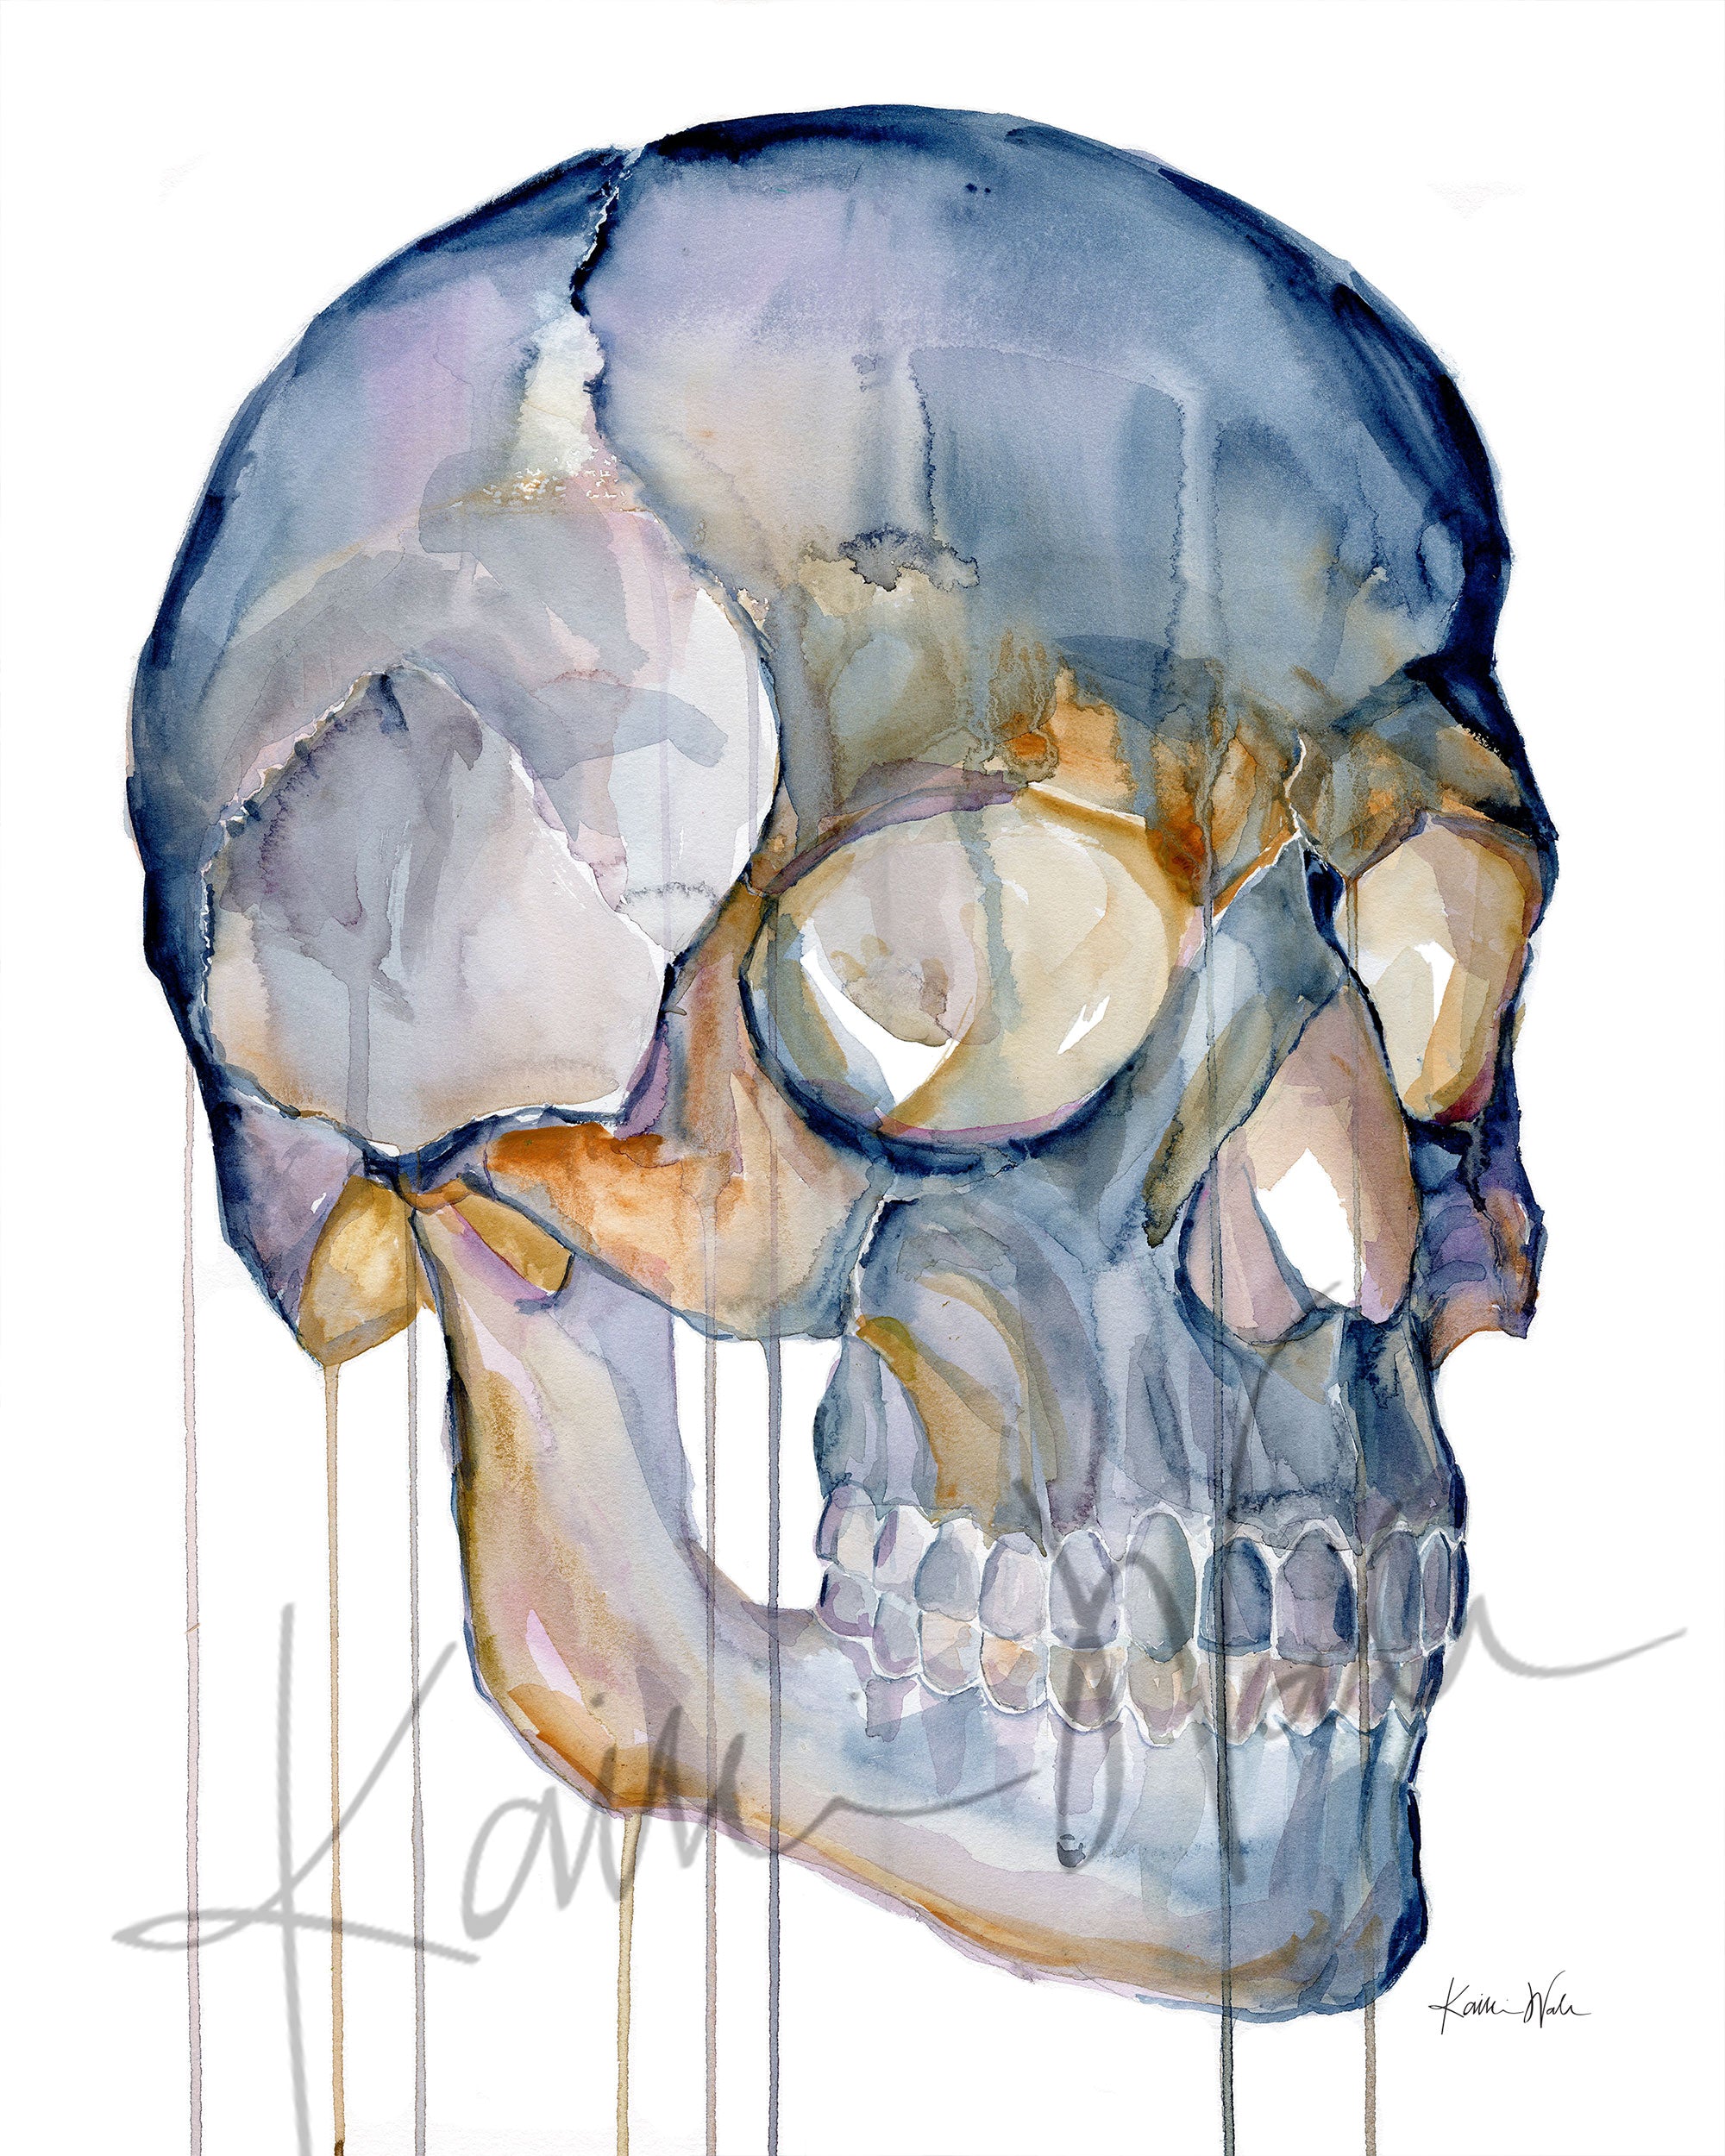 Unframed watercolor painting of a three quarter view skull.